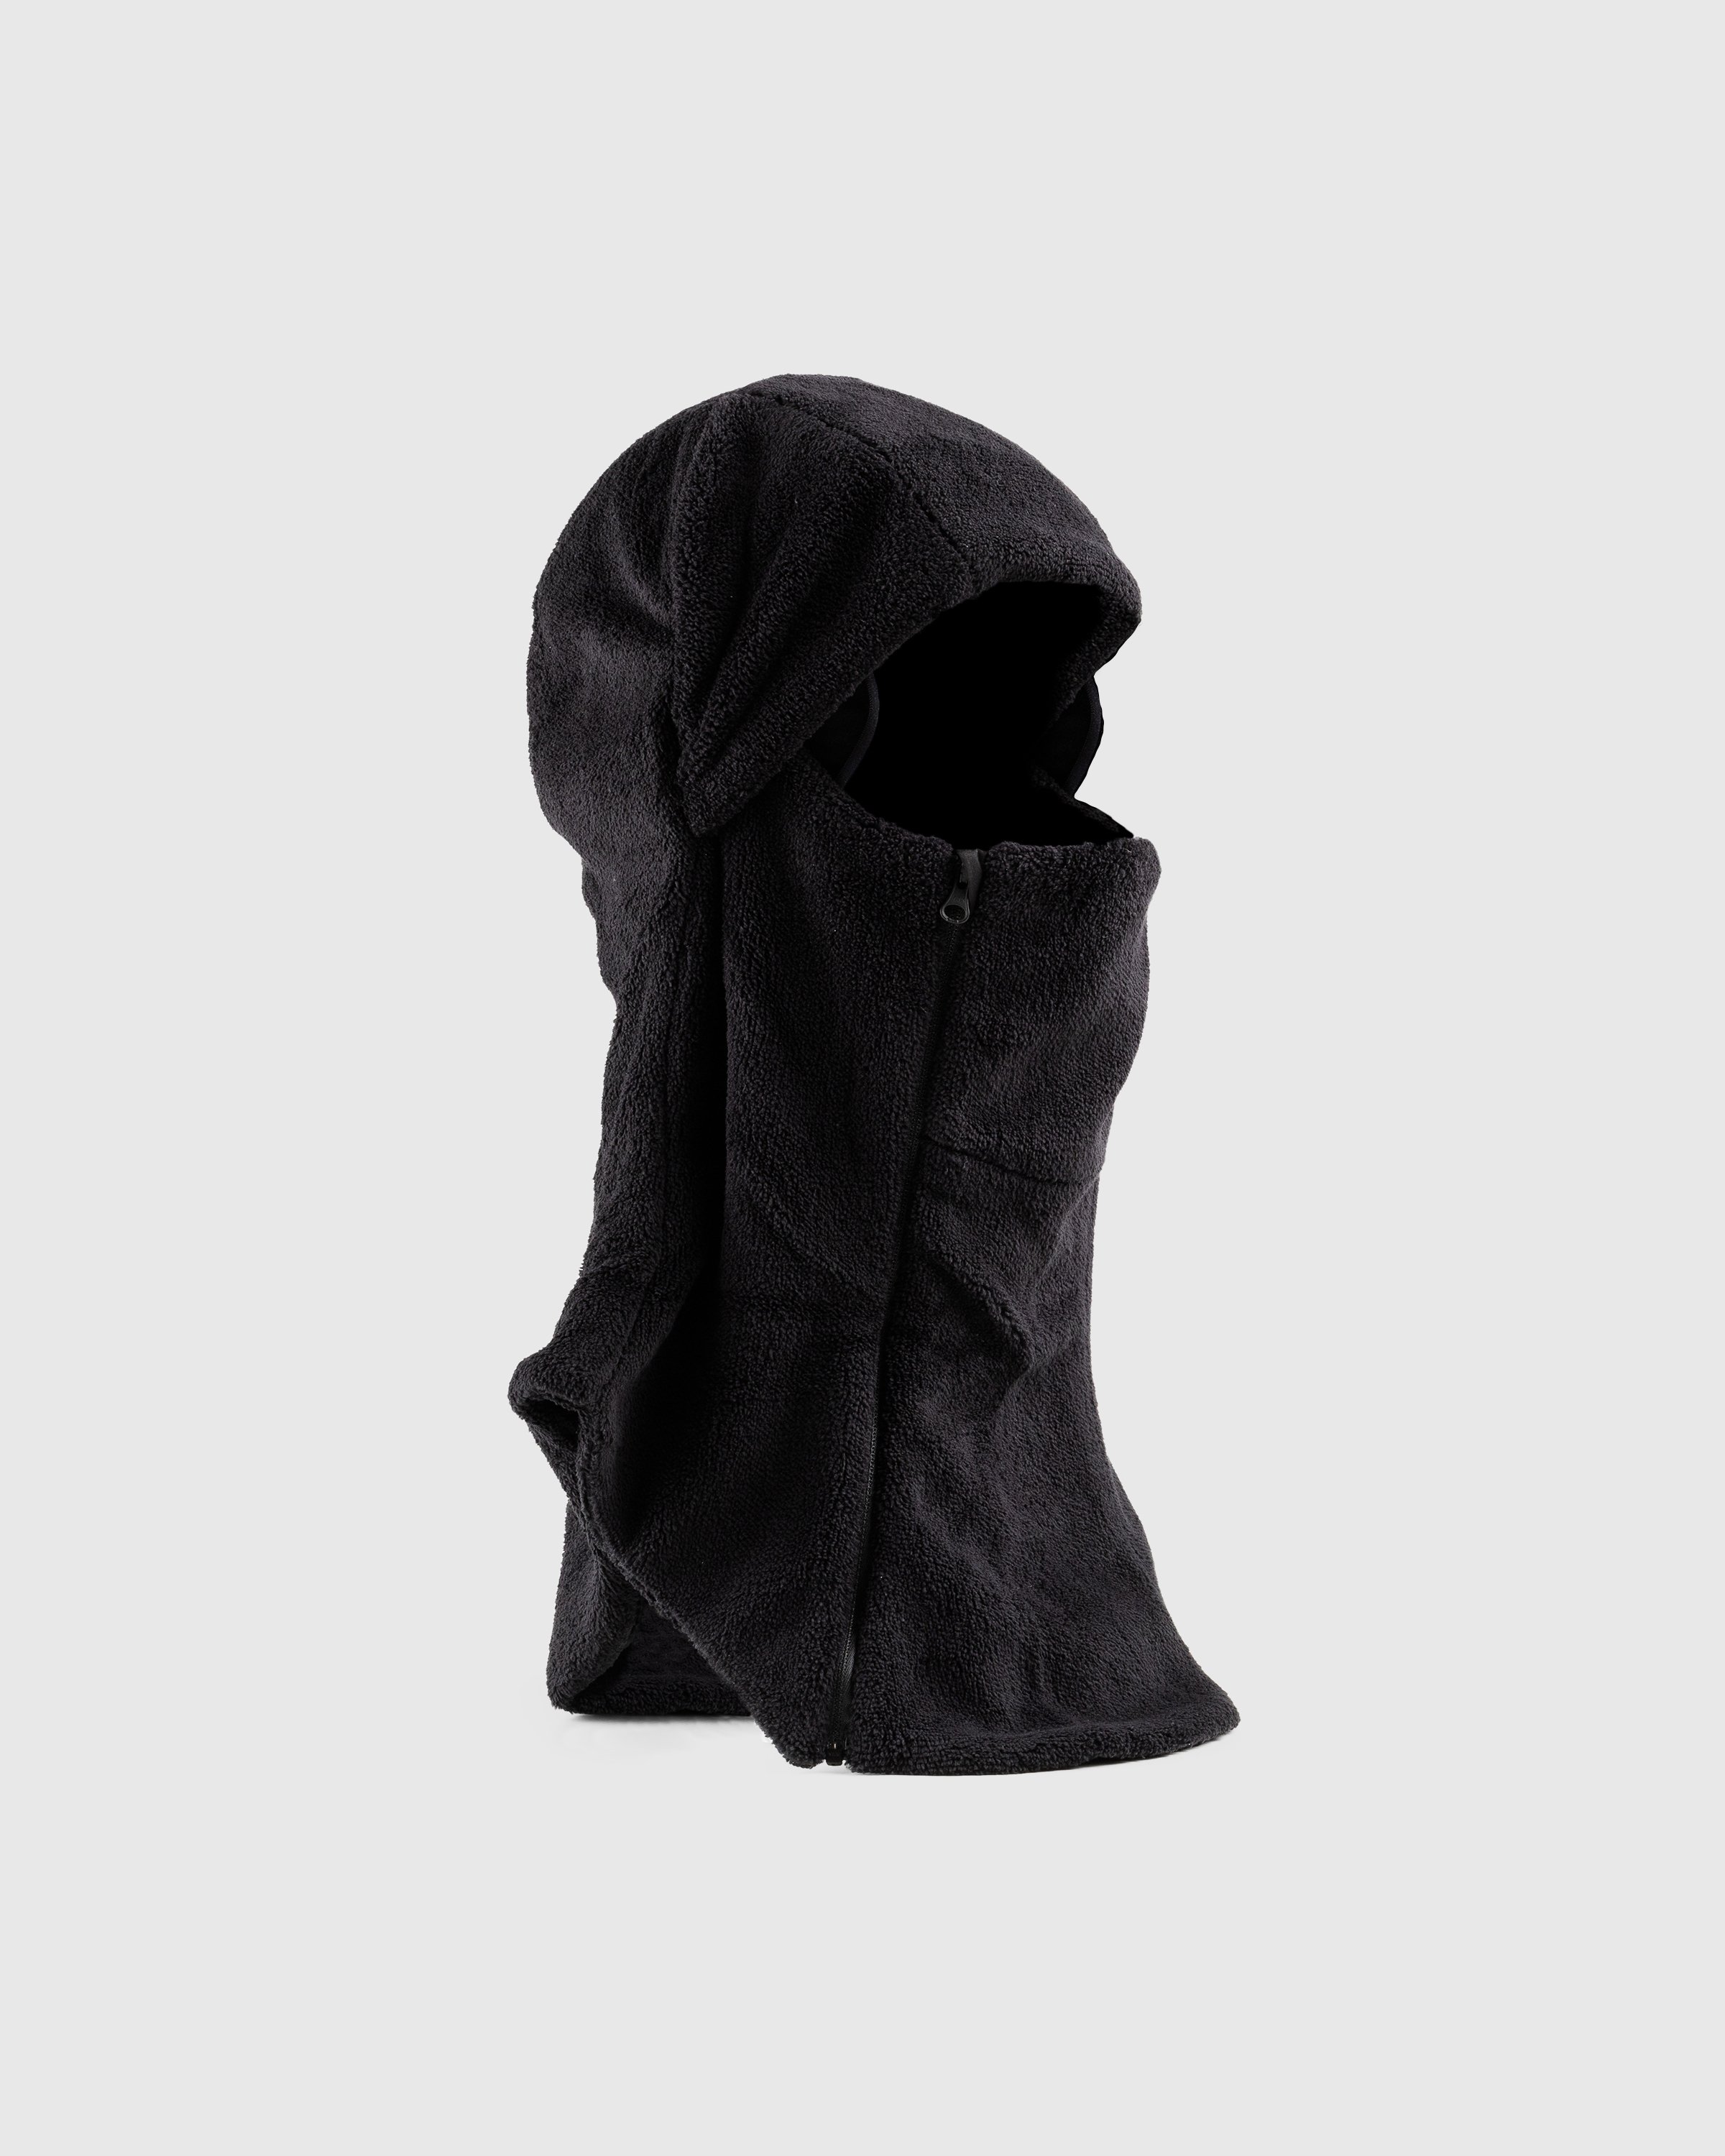 Post Archive Faction (PAF) - 5.1 BALACLAVA RIGHT - Accessories - Black - Image 1